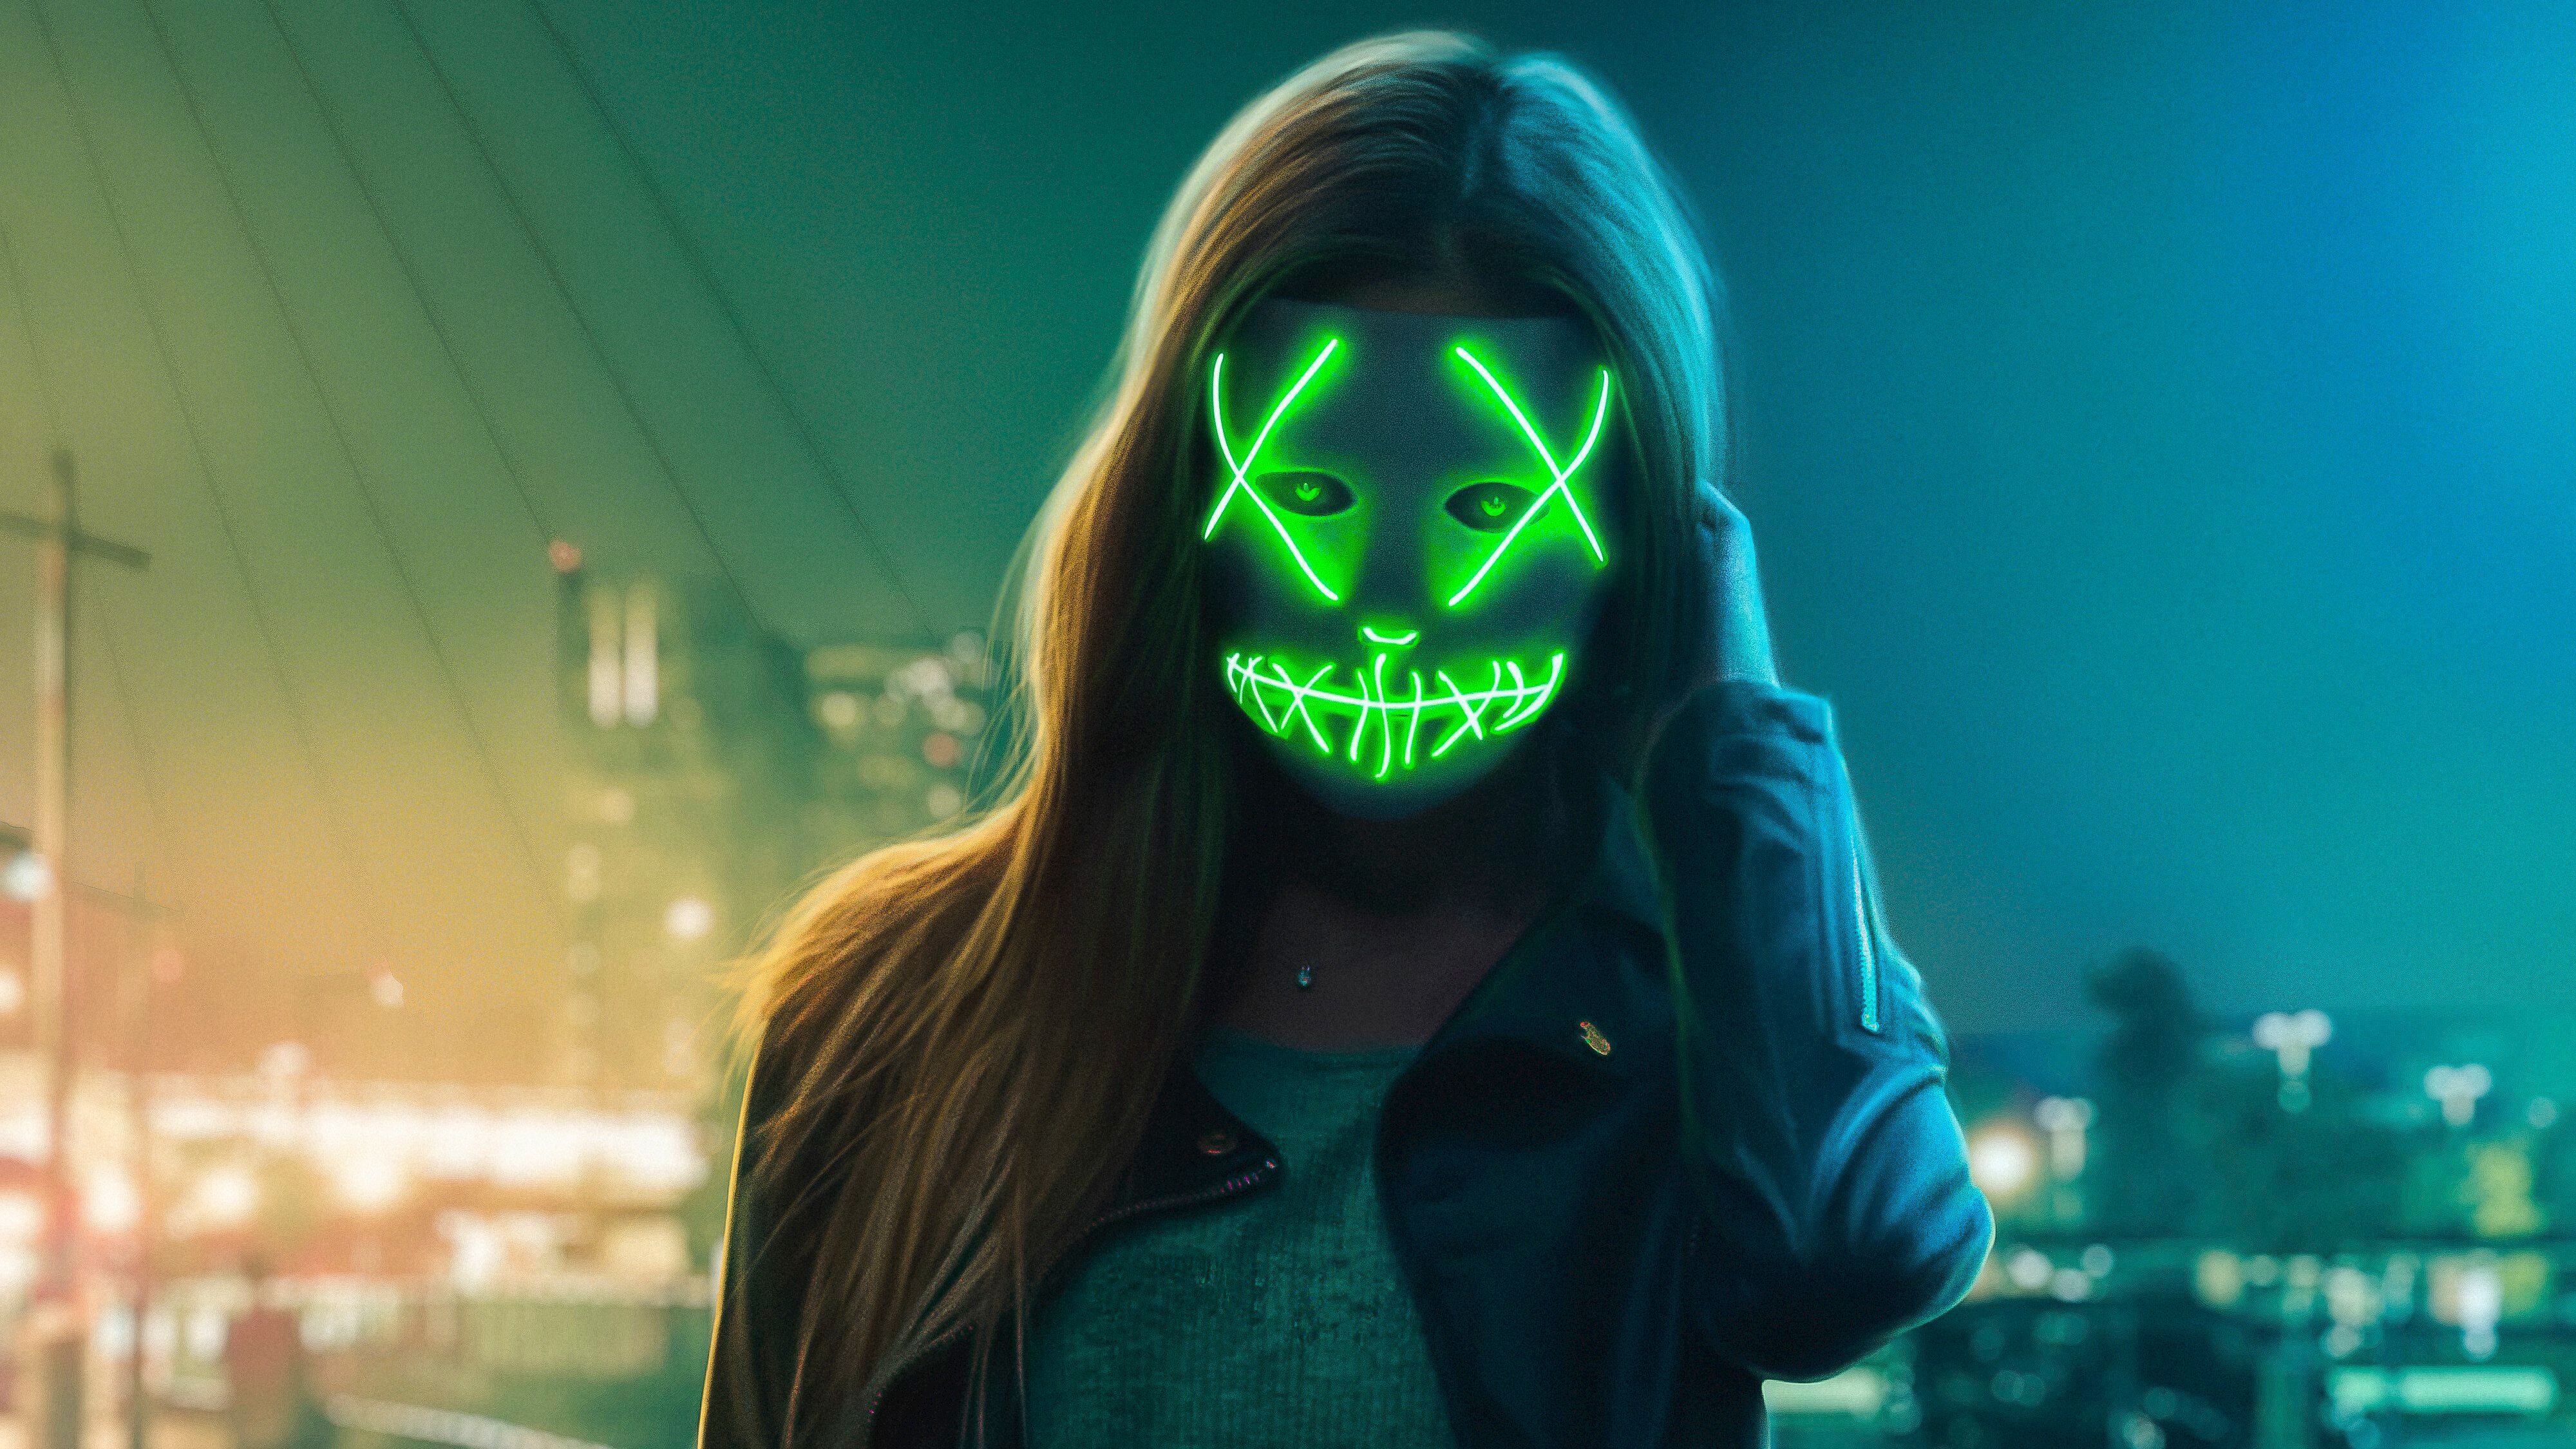 Neon Eye Mask Girl, HD Artist, 4k Wallpaper, Image, Background, Photo and Picture